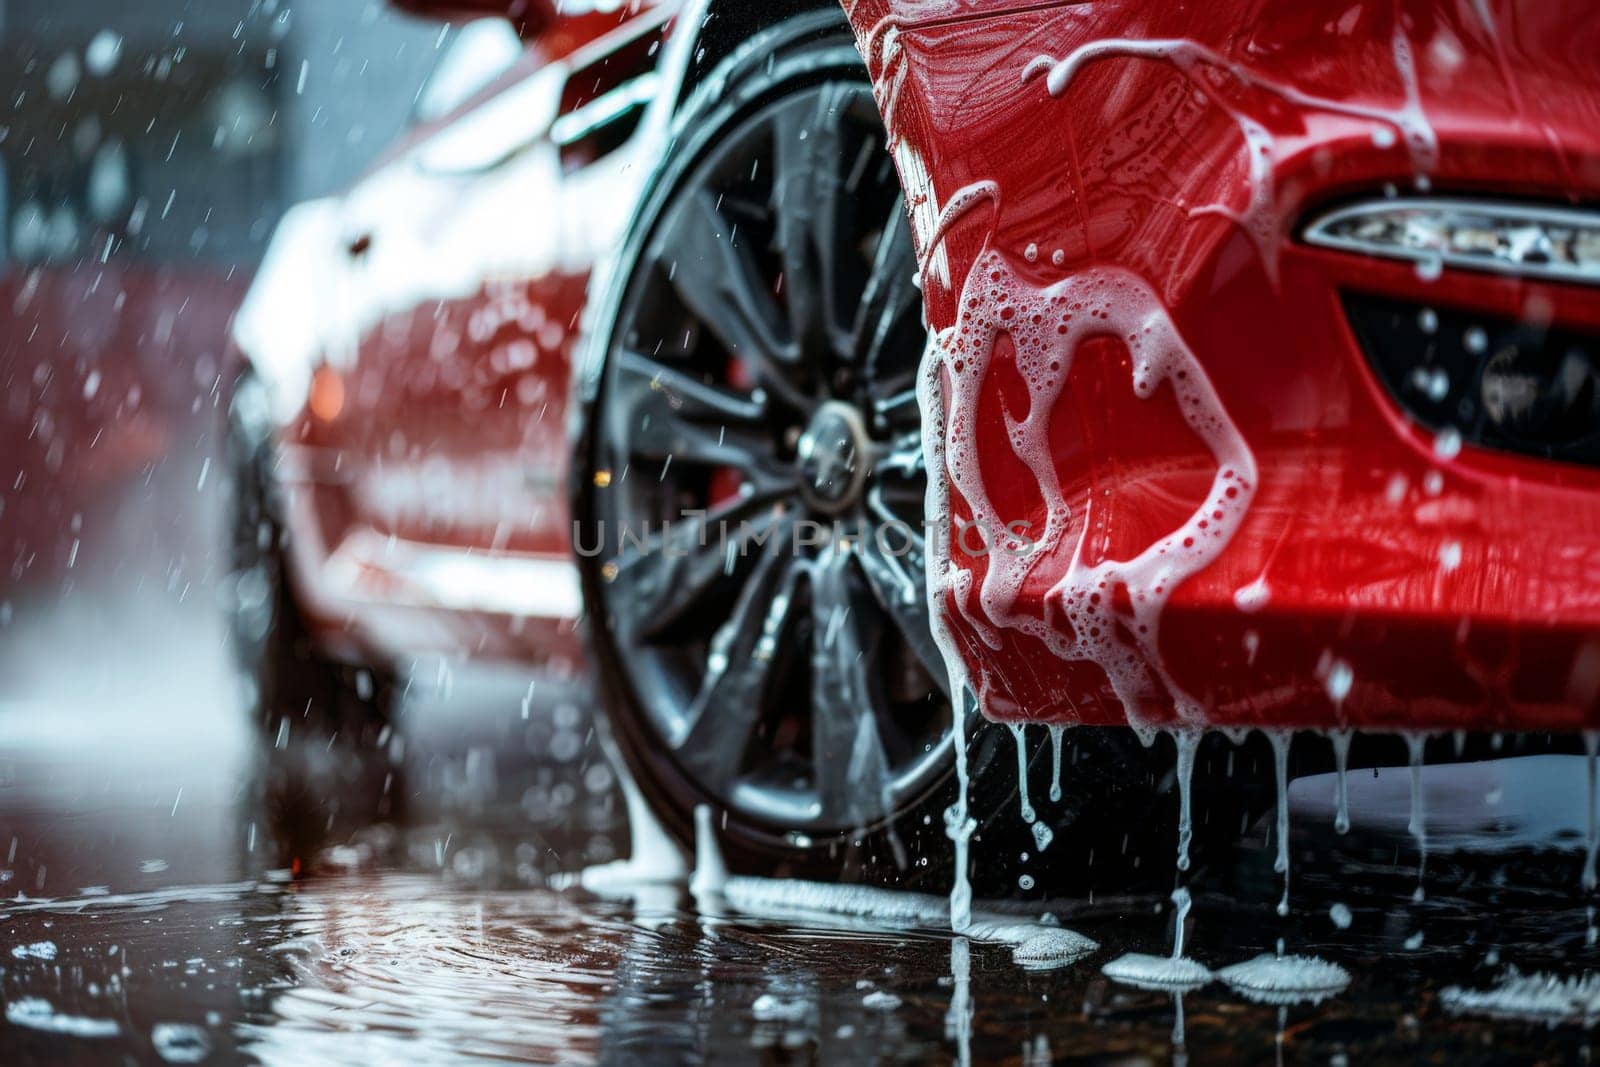 Outdoor car wash with foam soap, Washing Car Backdrop, washing with Copy Space.